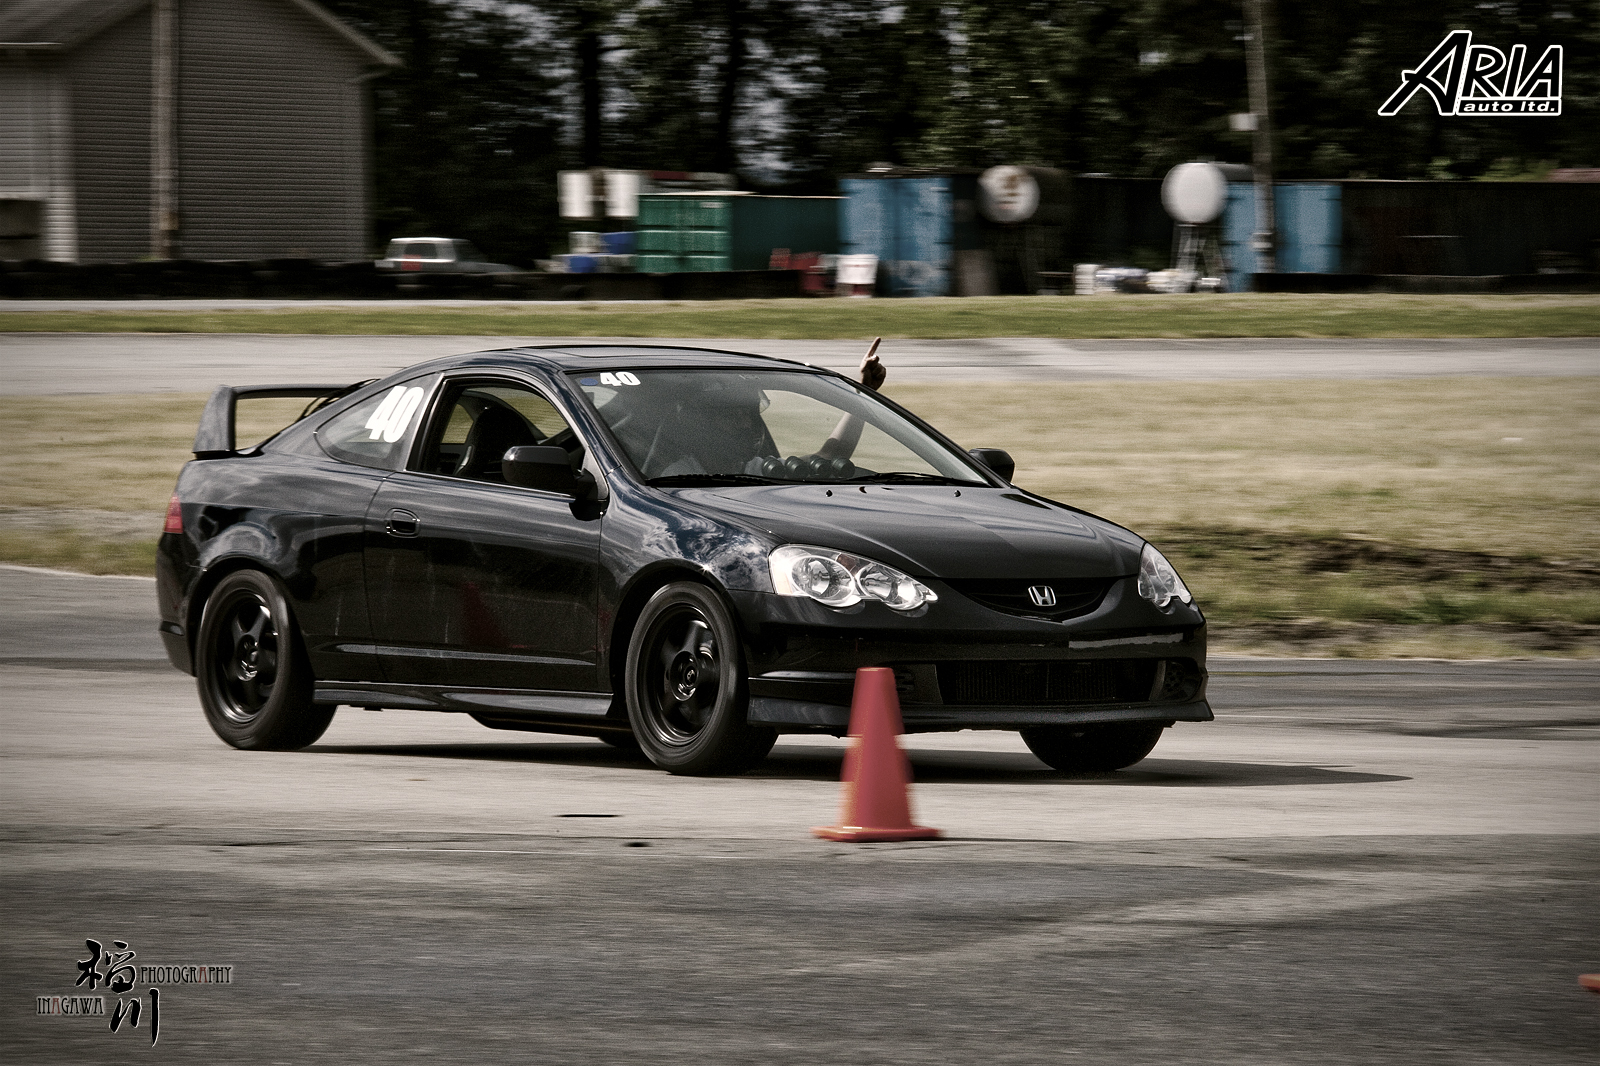 Aria Photoshoot - Mission Track Day: Turbocharged Acura RSX Type S ...